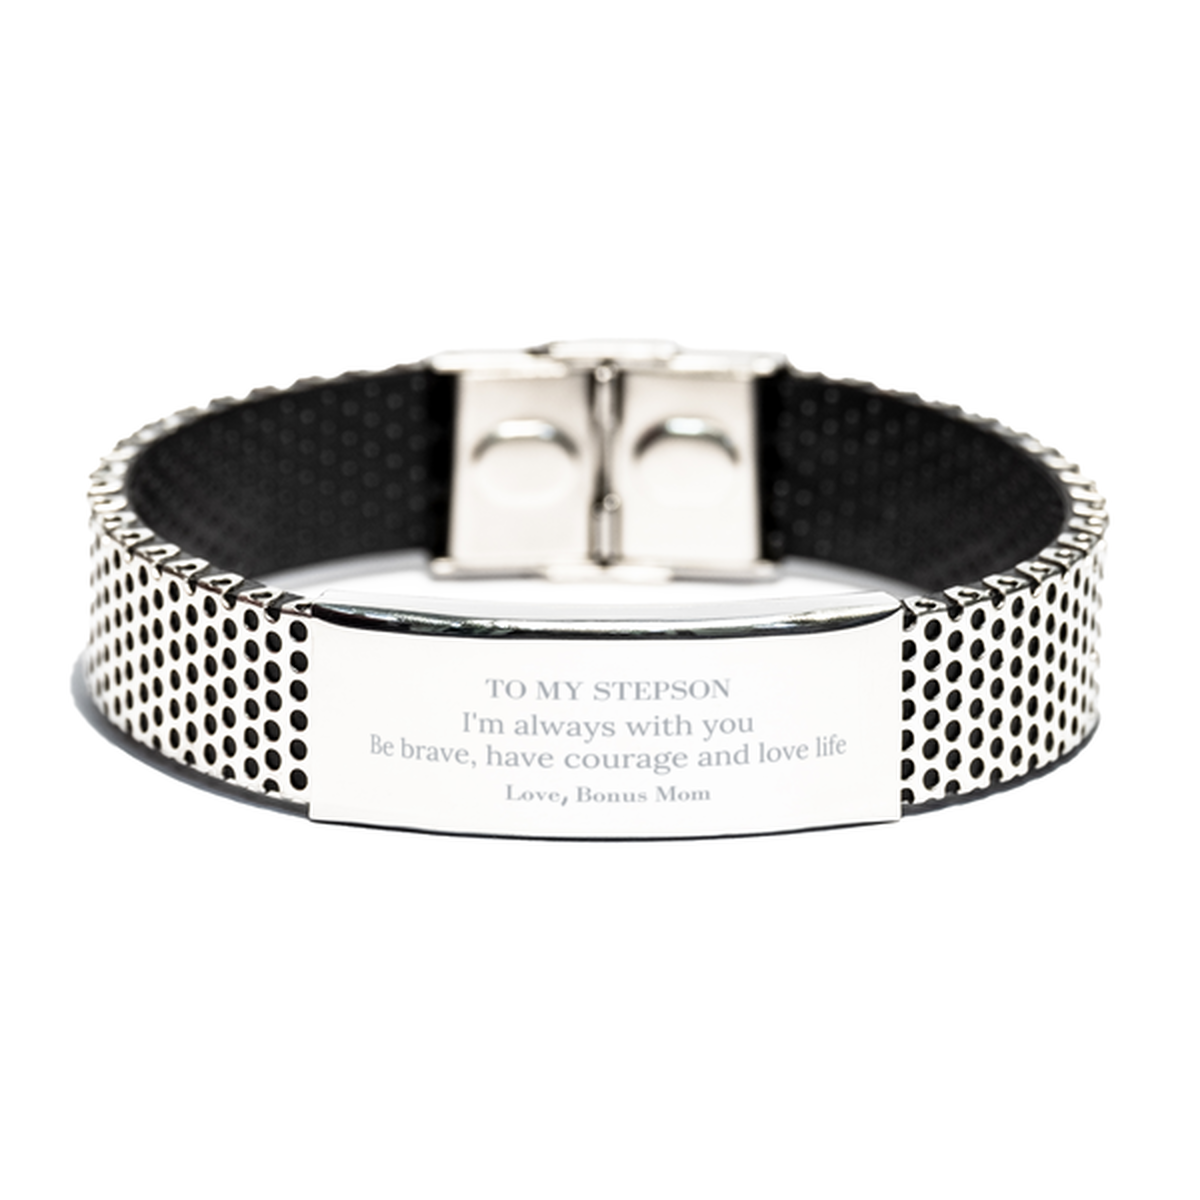 To My Stepson Gifts from Bonus Mom, Unique Stainless Steel Bracelet Inspirational Christmas Birthday Graduation Gifts for Stepson I'm always with you. Be brave, have courage and love life. Love, Bonus Mom